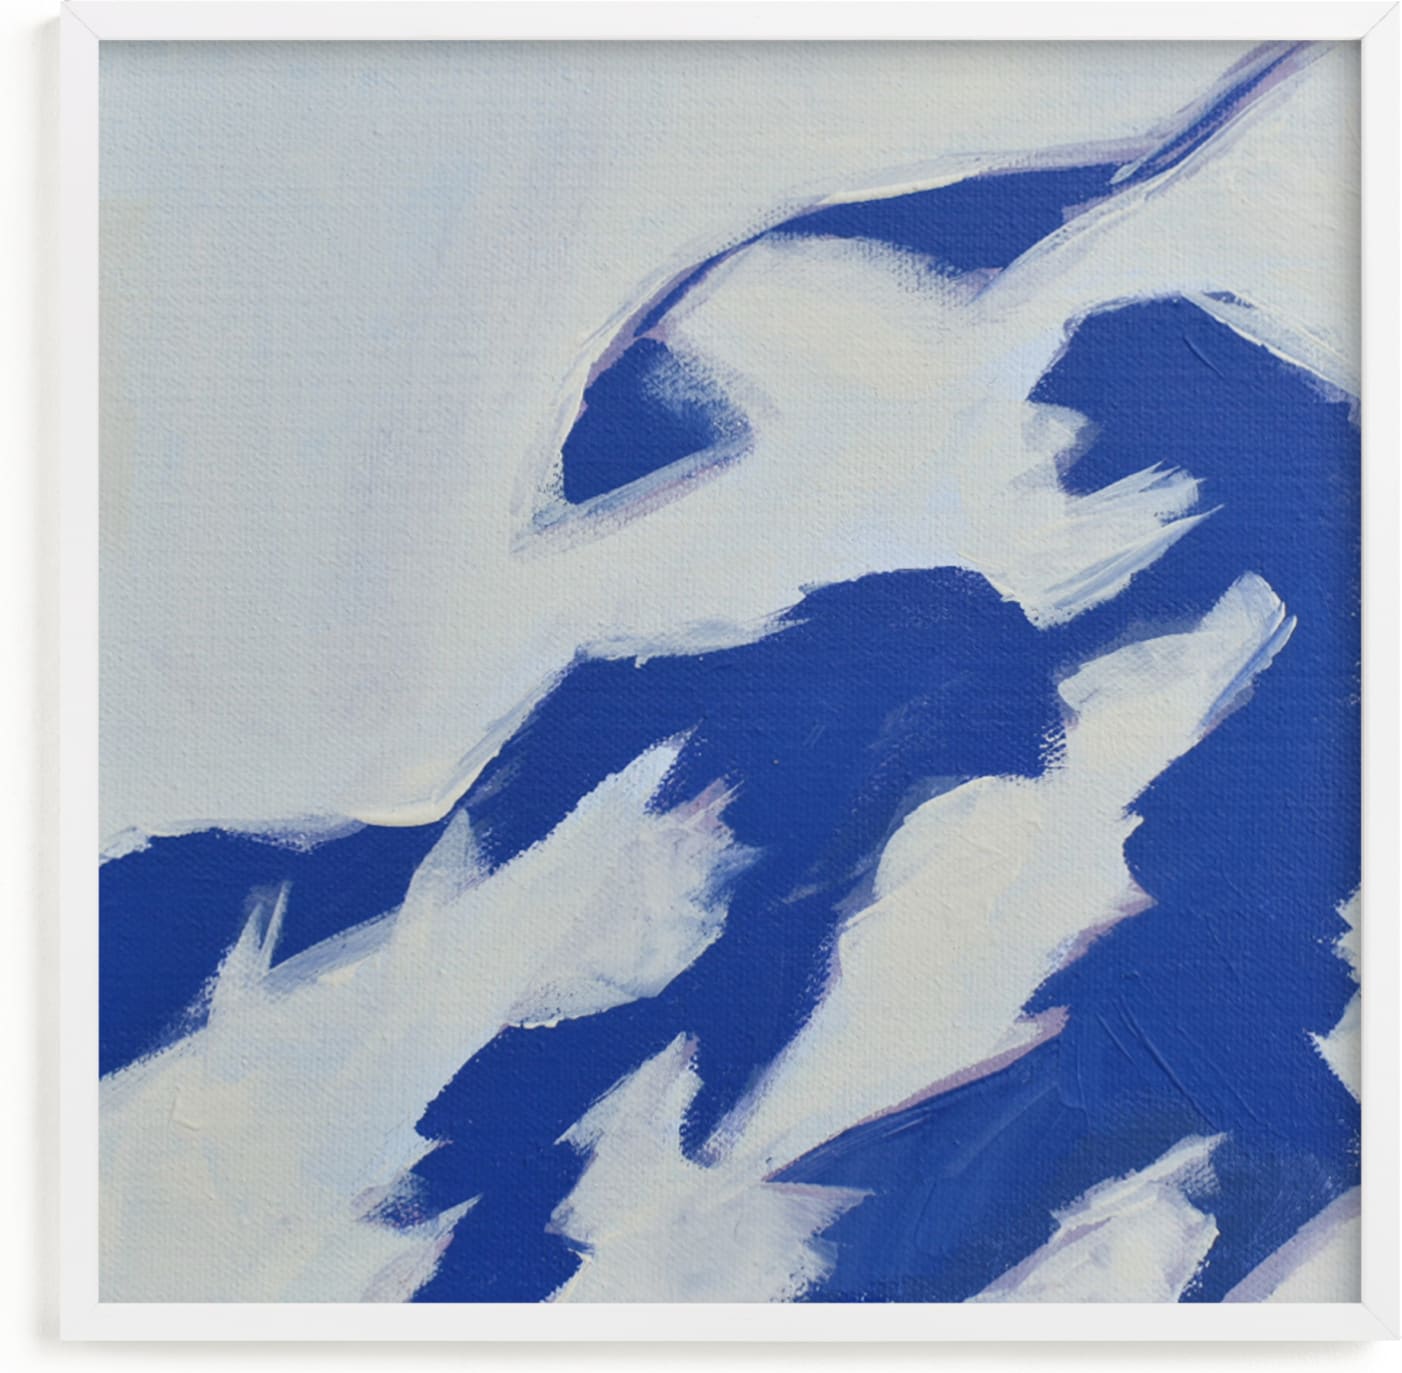 This is a blue art by Katie Analise called Leaf Shadows I.